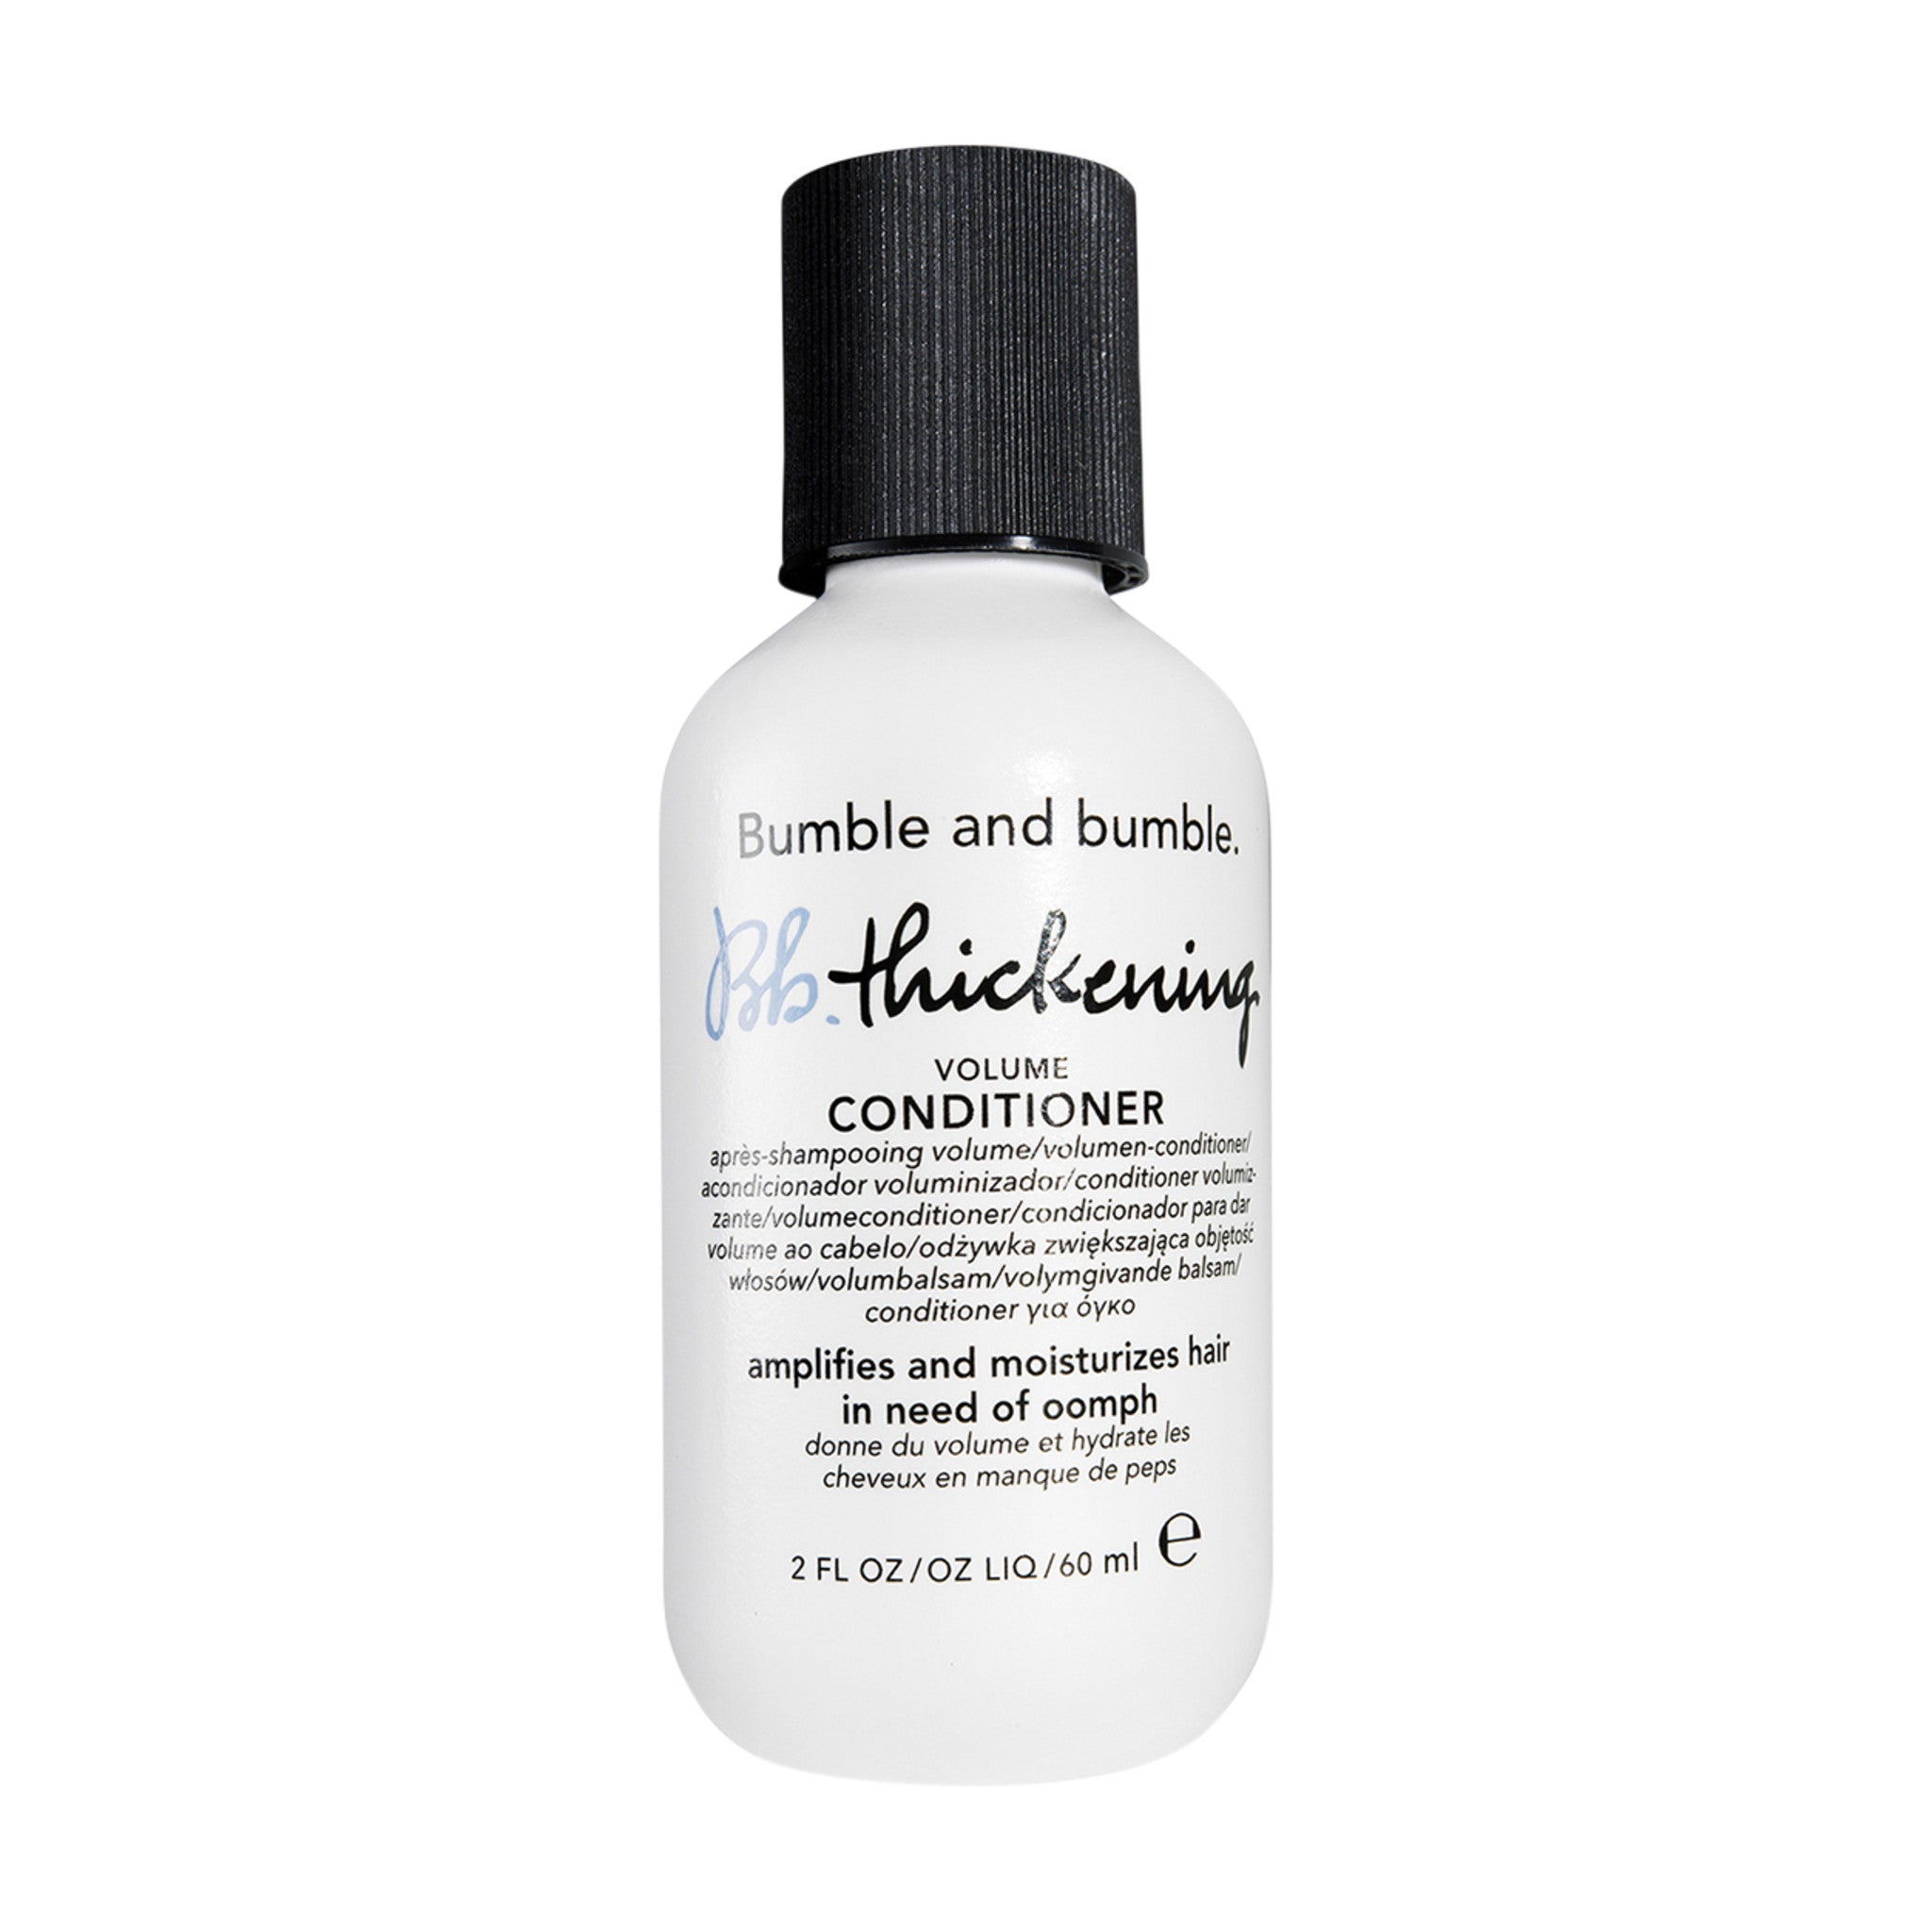 Bumble and Bumble Thickening Volume Conditioner Size variant: 2 oz main image.